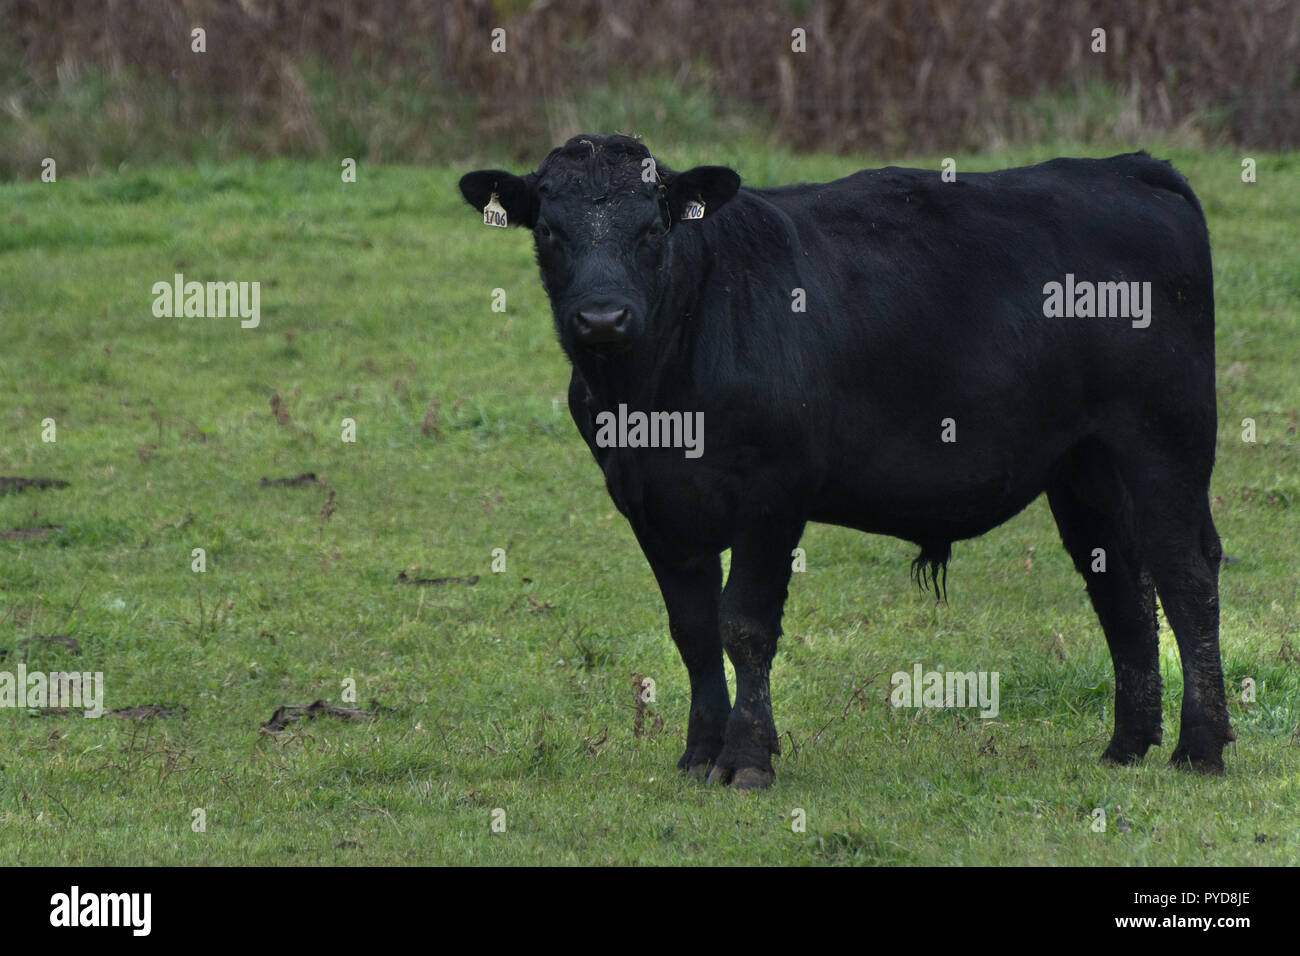 A black angus cow standing in a field looking at the camera Stock Photo